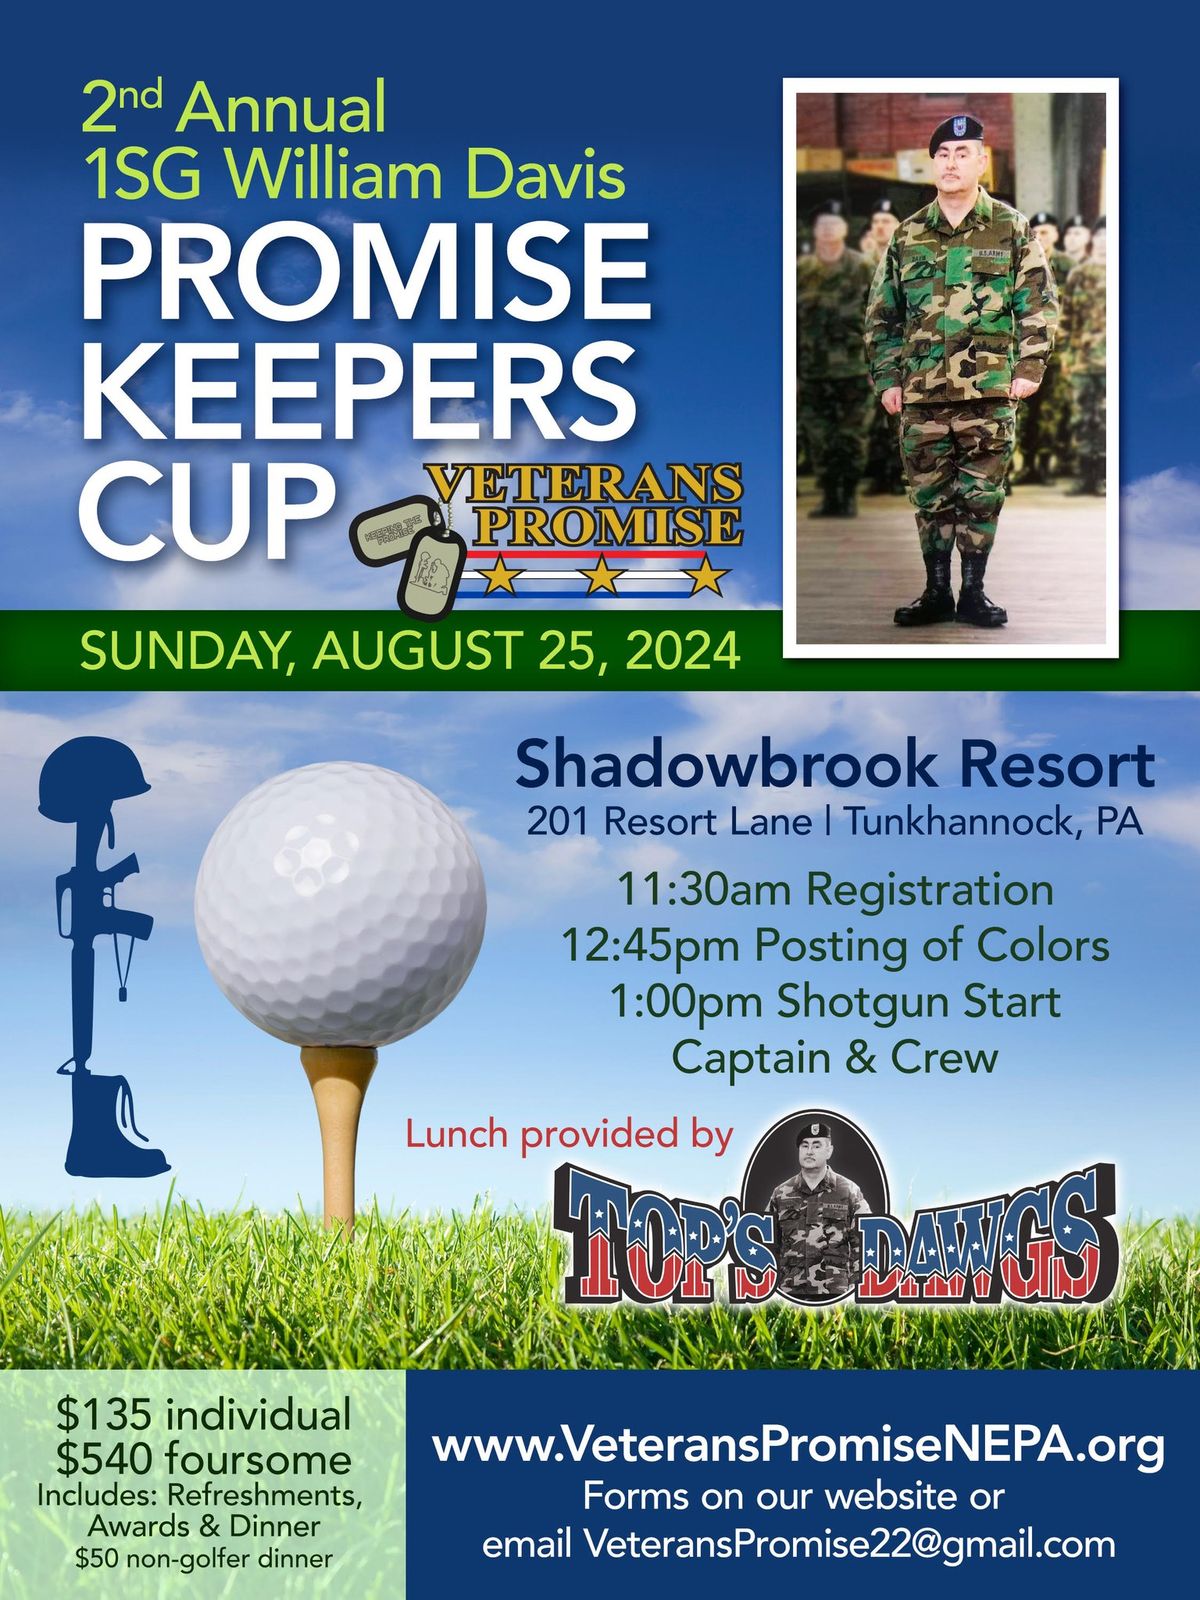 2nd Annual 1SG William Davis Promise Keepers Cup